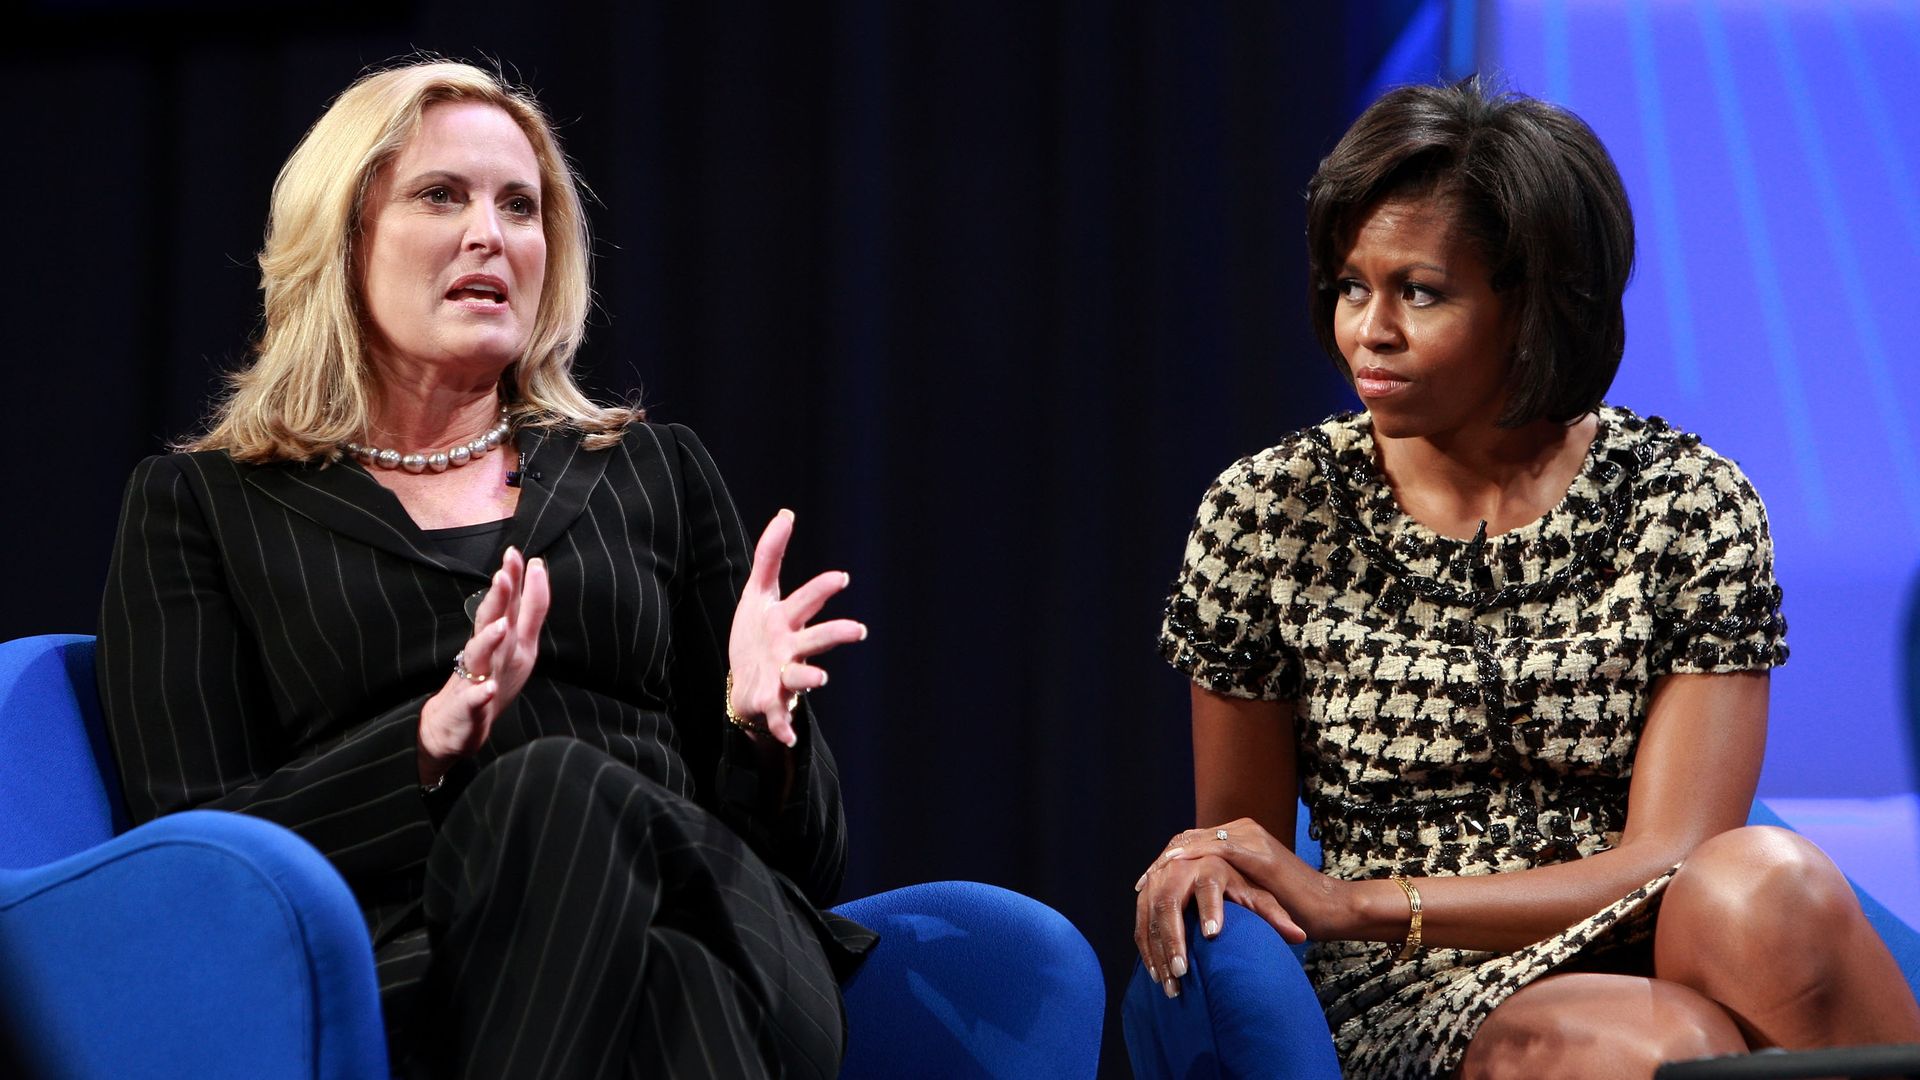 Ann Romney and Michelle Obama durning the 2007 Women's Conference.